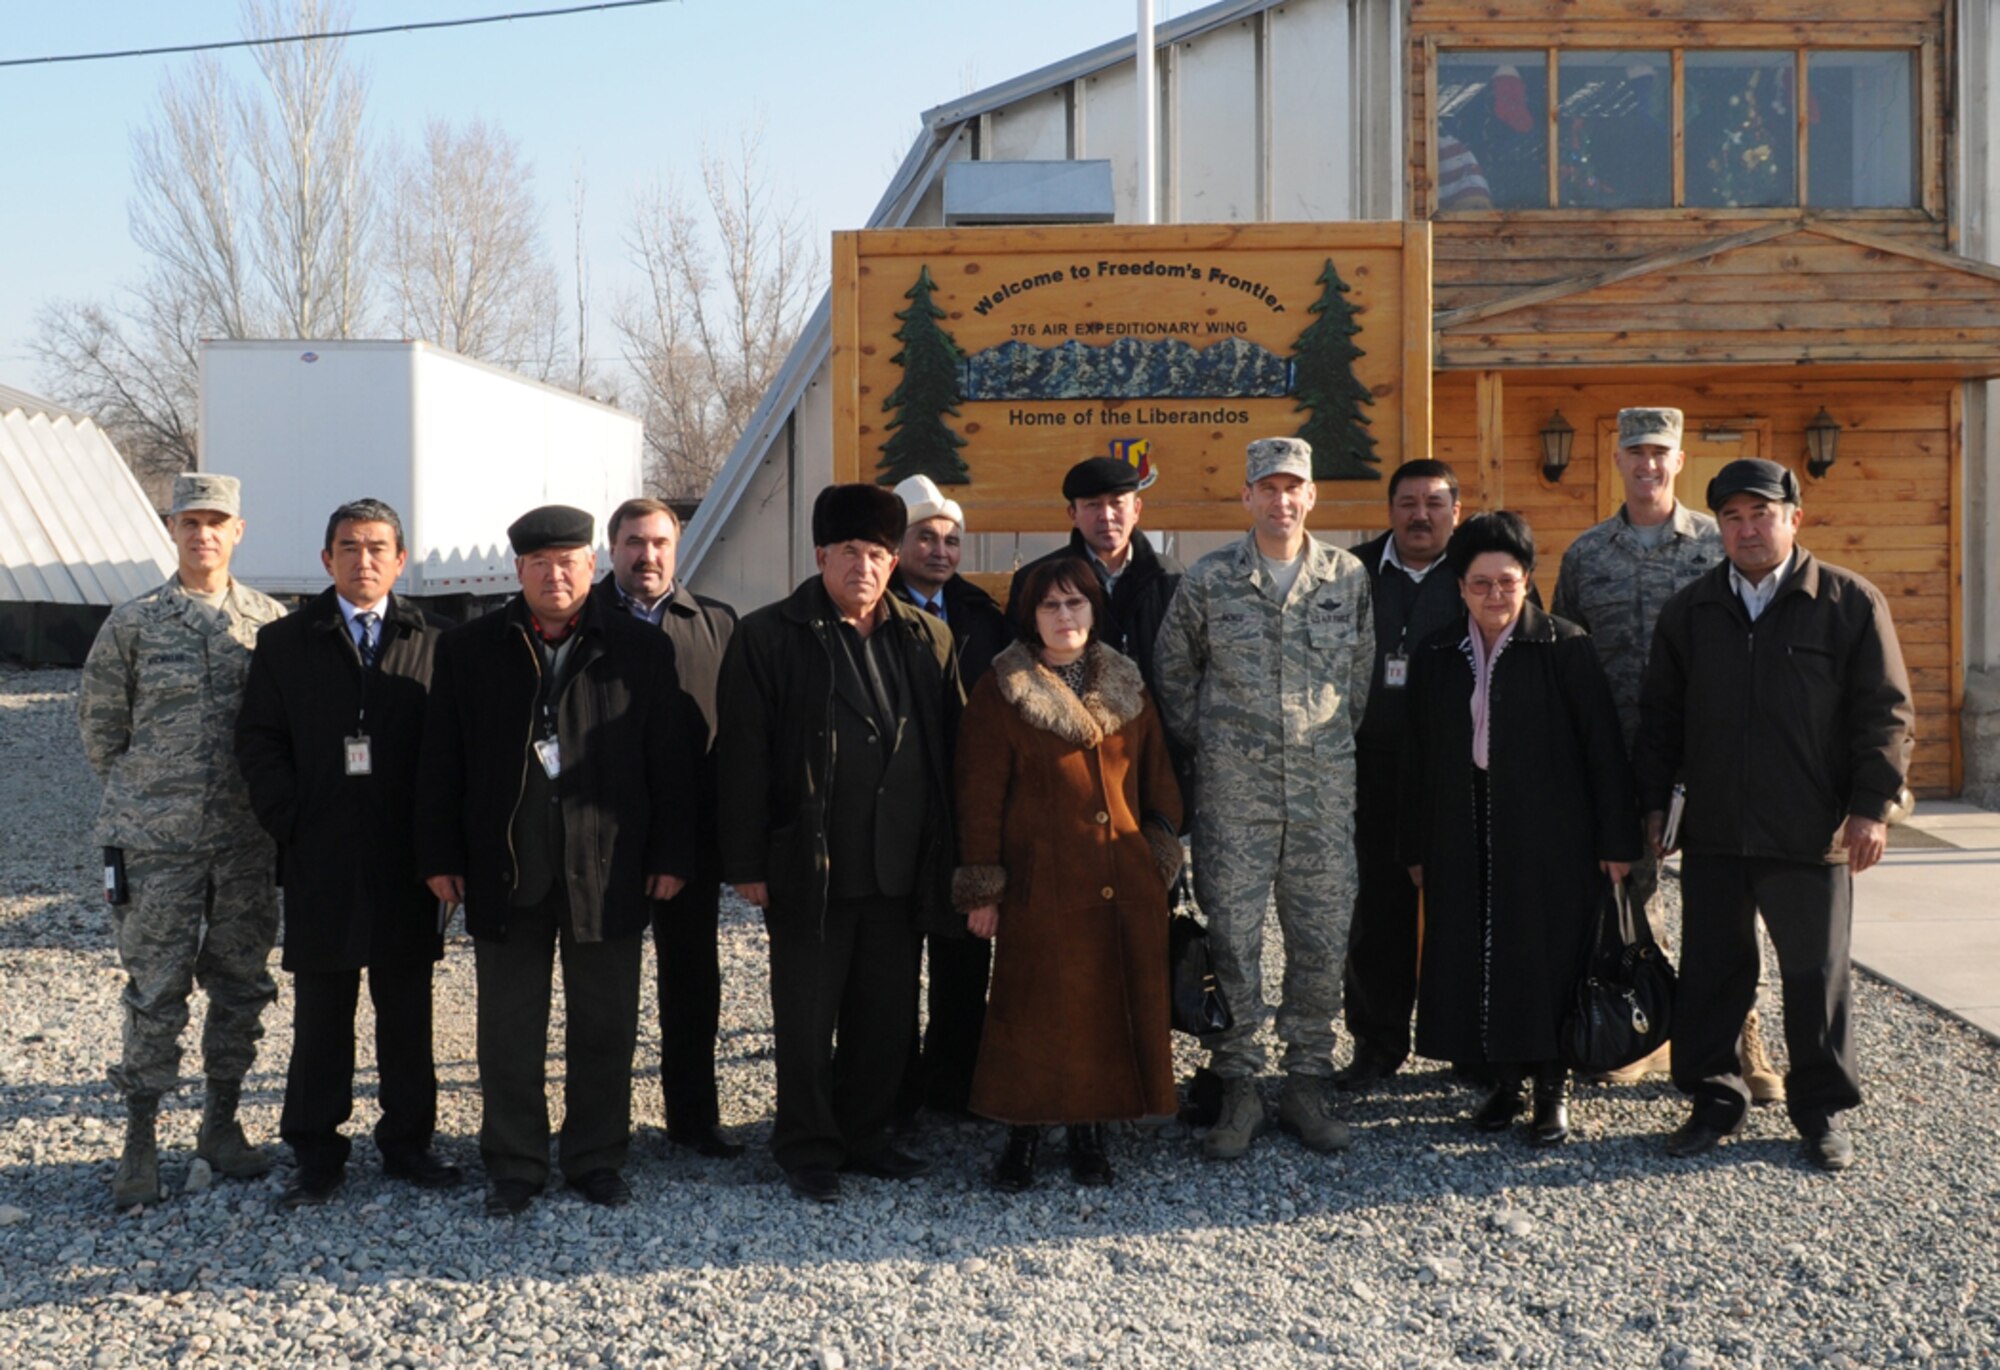 Nearly a dozen mayors and their deputies from six local Kyrgyz villages pose for a group picture with (left to right) Col. David MacMillan, 376th Air Expeditionary Wing vice commander, Col. Christopher Bence, 376th AEW commander and Chief Master Sgt. Kevin Soltis, 376th AEW command chief, before kicking off a tour of Manas and lunch with wing leadership, Dec. 10. The visit provided an opportunity to strengthen friendships and discuss issues affecting the local villages that the base can assist with. (Air Force photo / Senior Airman Ruth Holcomb) 	